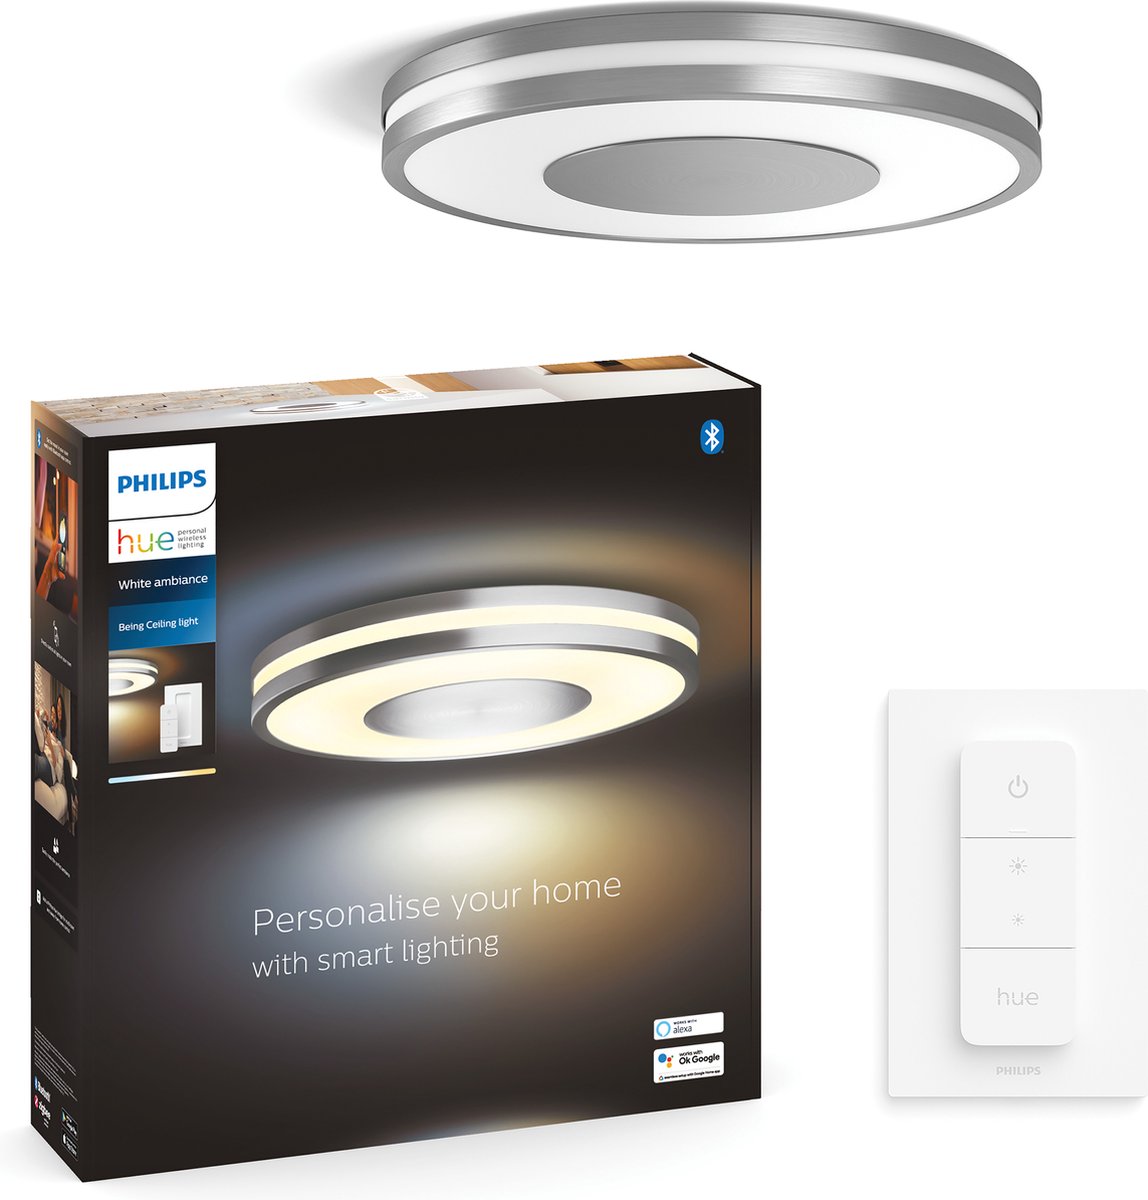 Philips Hue Being plafondlamp - White Ambiance - aluminium - Bluetooth - incl. 1 dimmer switch - Philips Hue